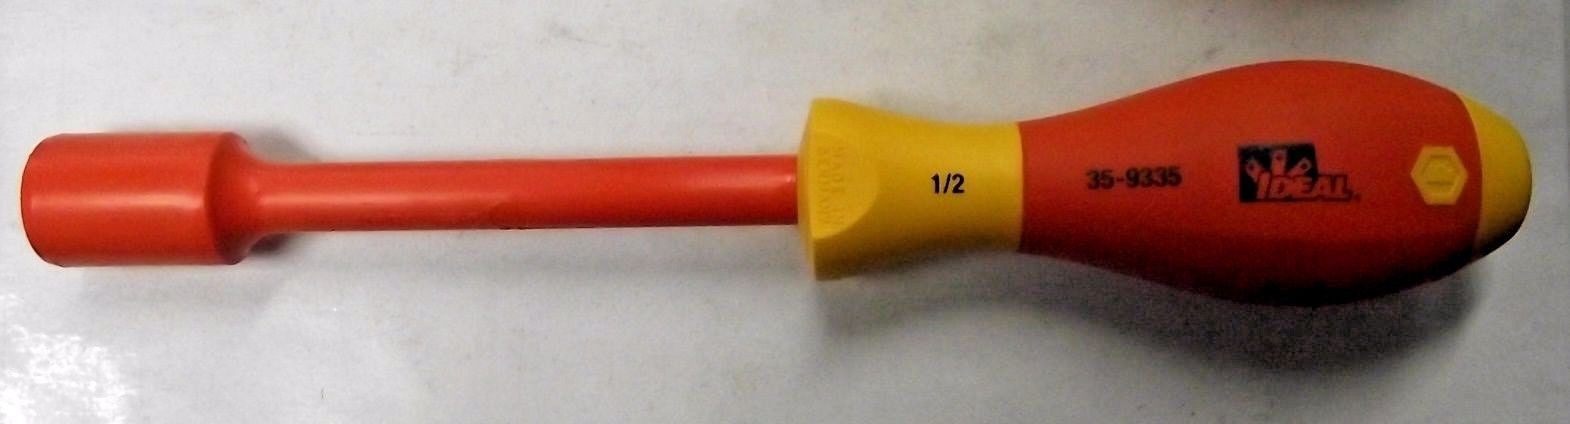 IDEAL Electrical 35-9335 1/2" SAE Insulated Nut Driver Germany